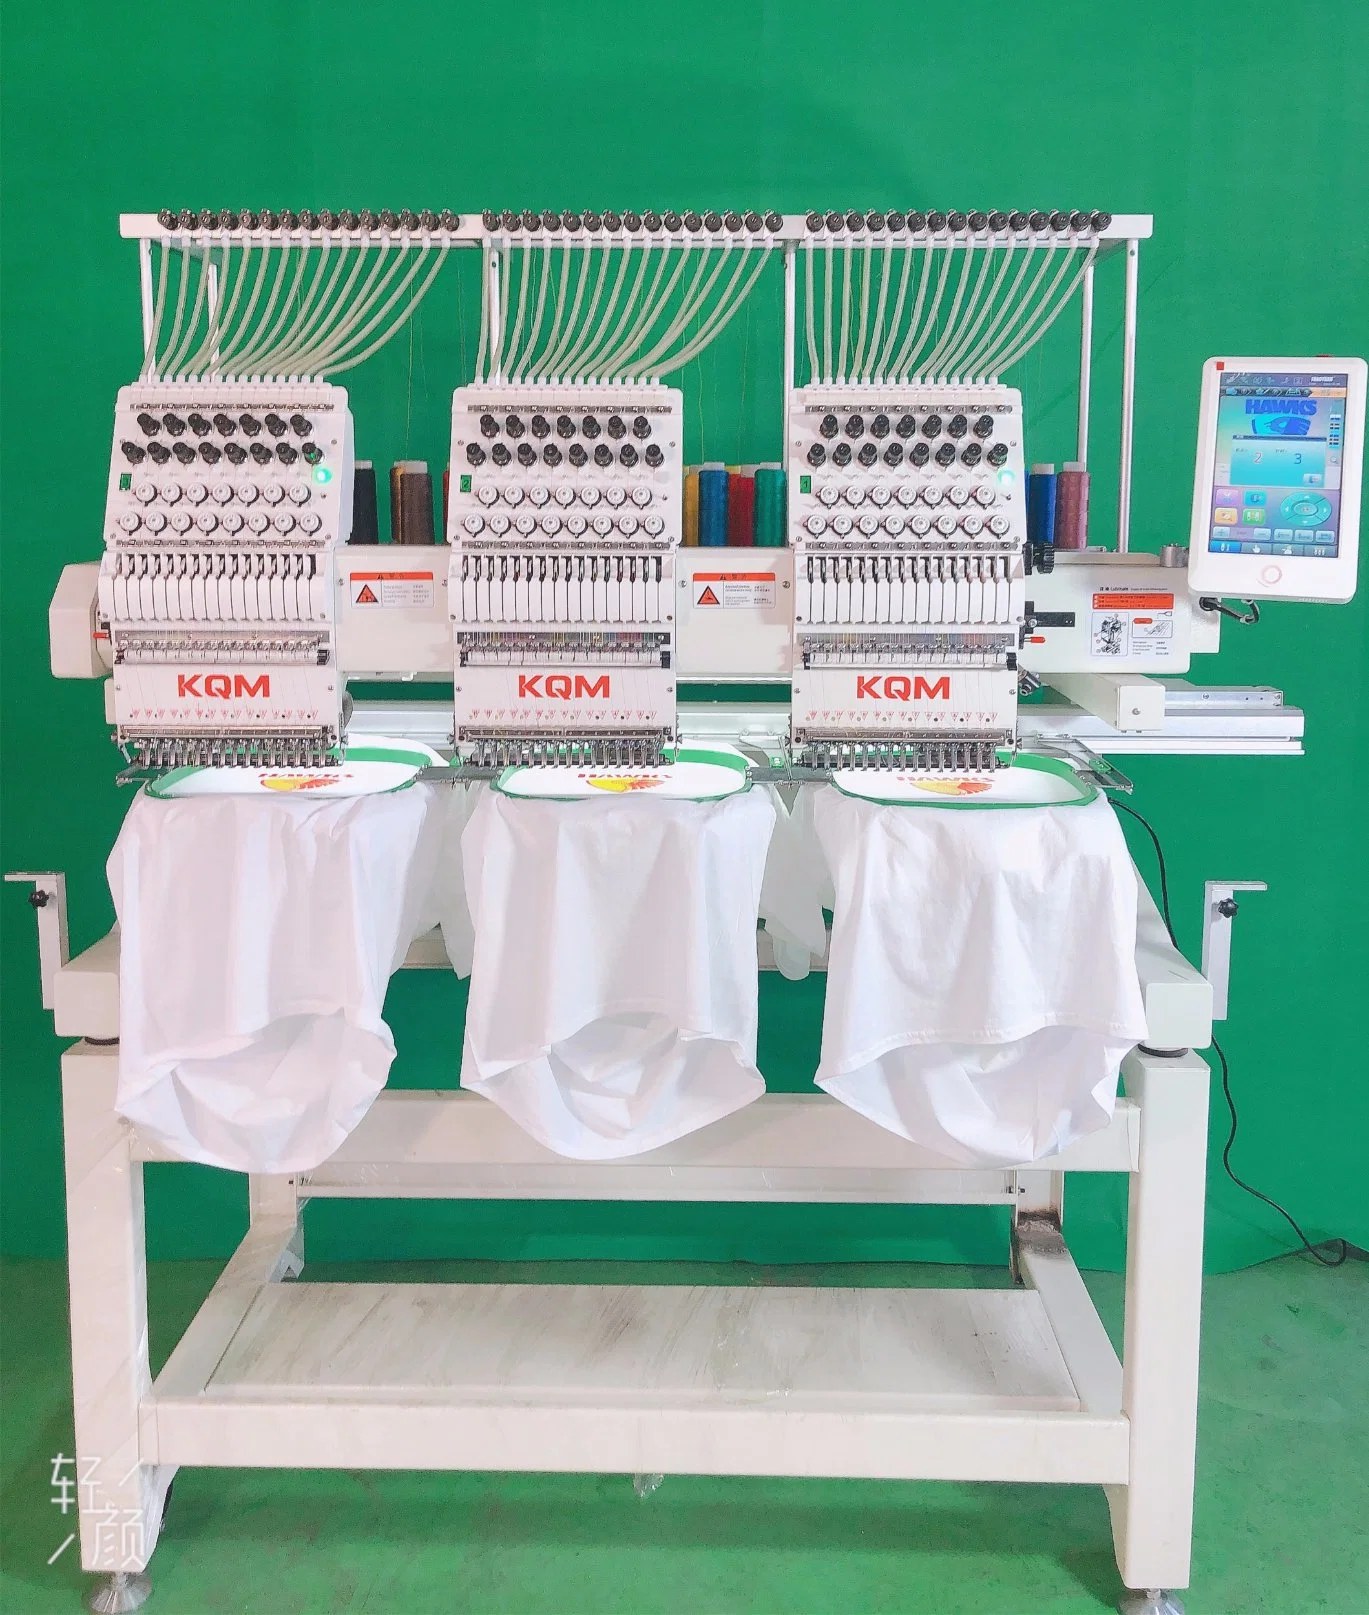 Barudan/Computerized/3 Head 12 Needles Curtain Embroidery Machine with Price Spare Parts for Hat/Cap/T-Shirt/Cloth/Garment in China